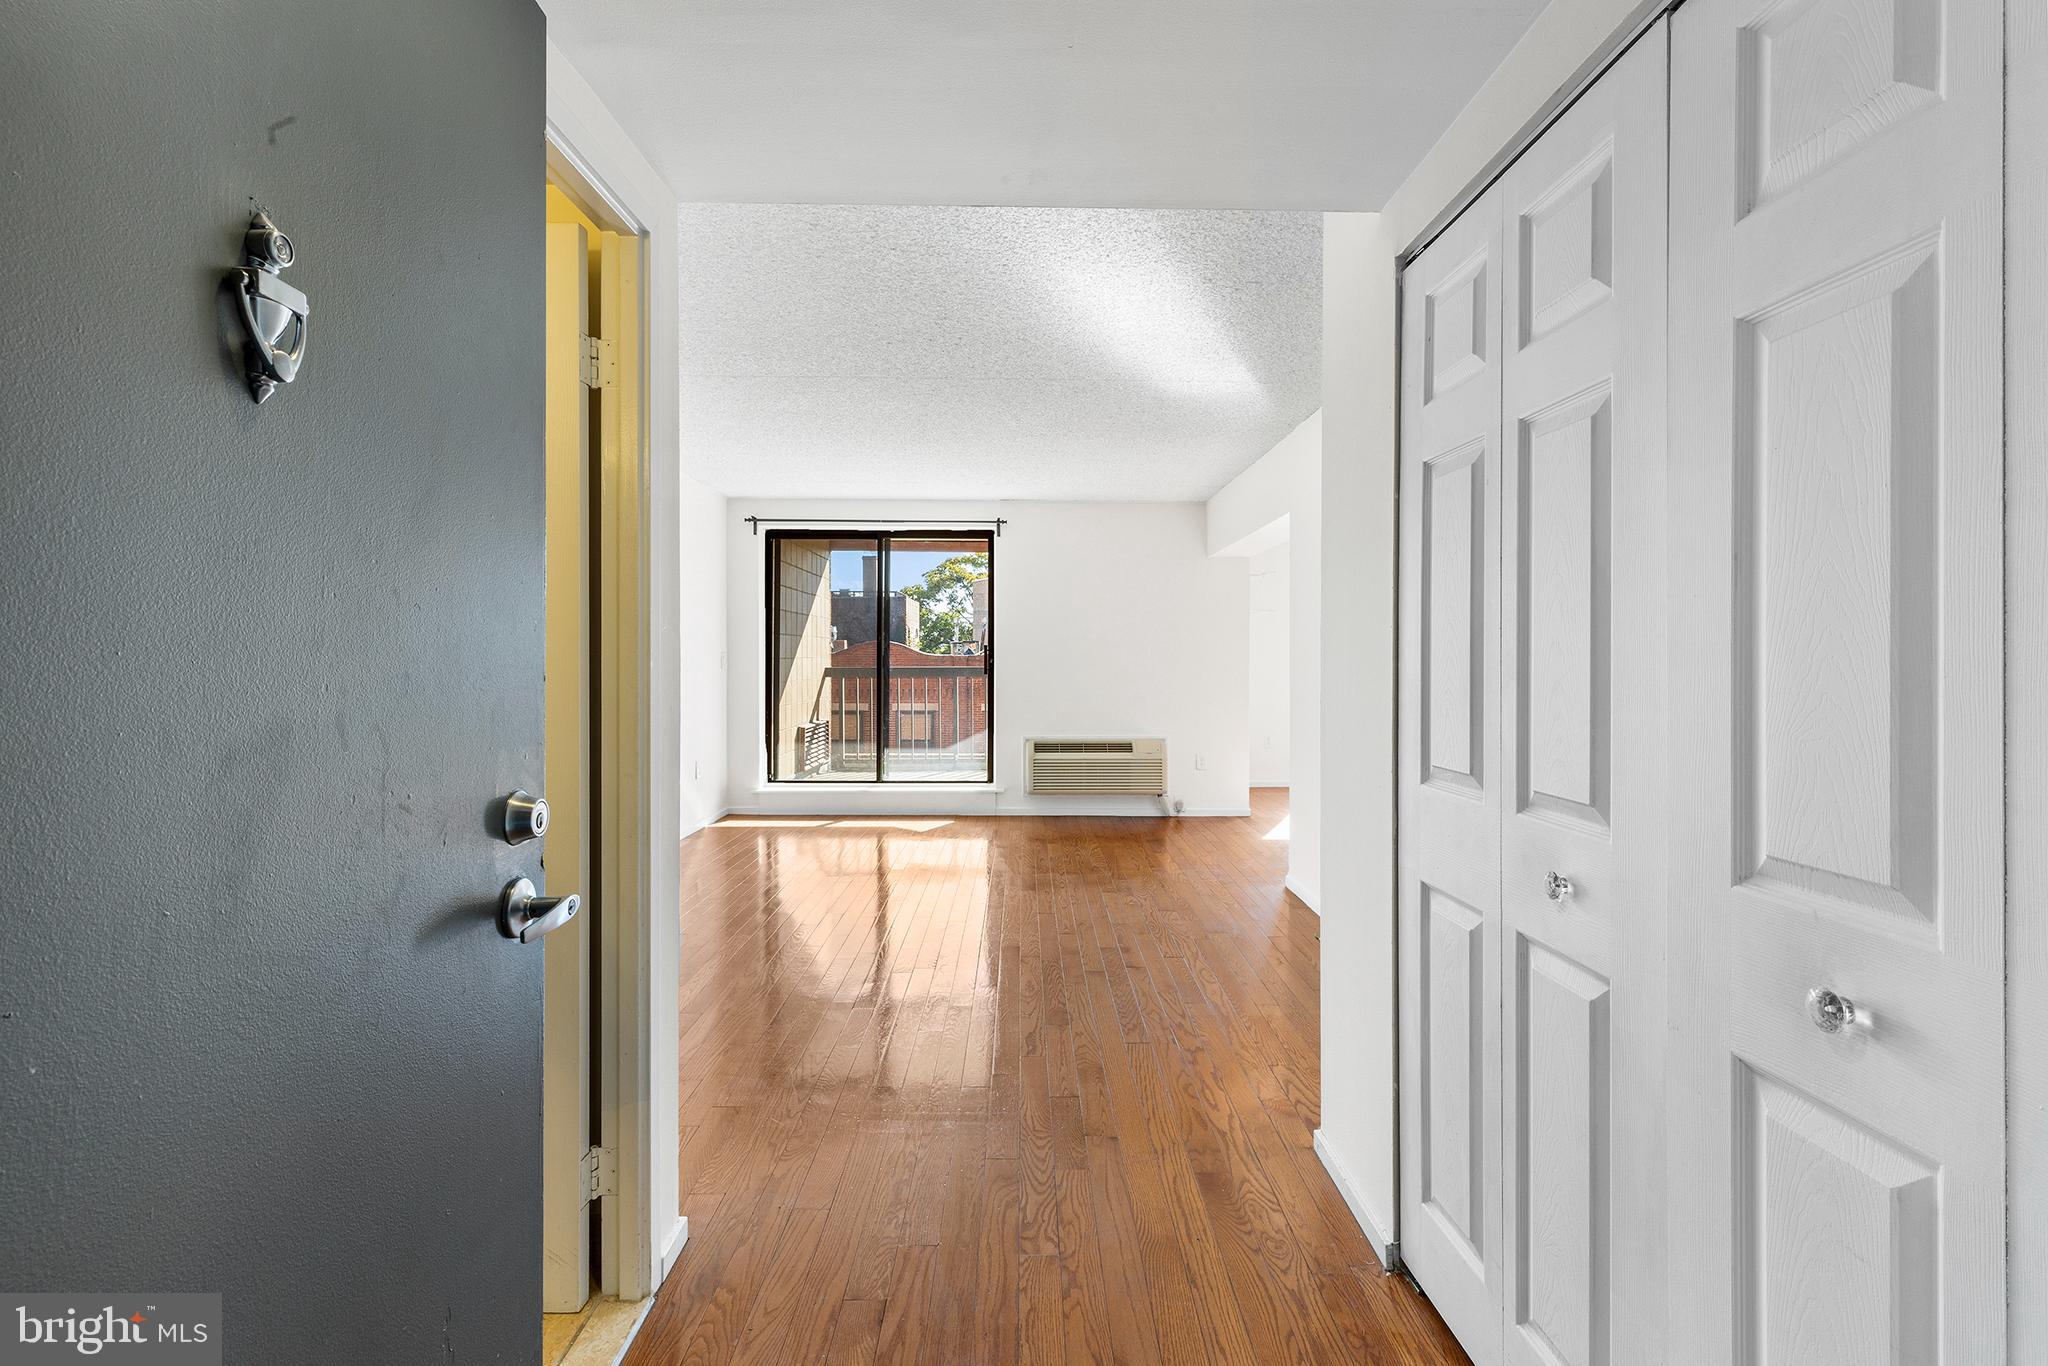 a view of a hallway with wooden floor and closet area